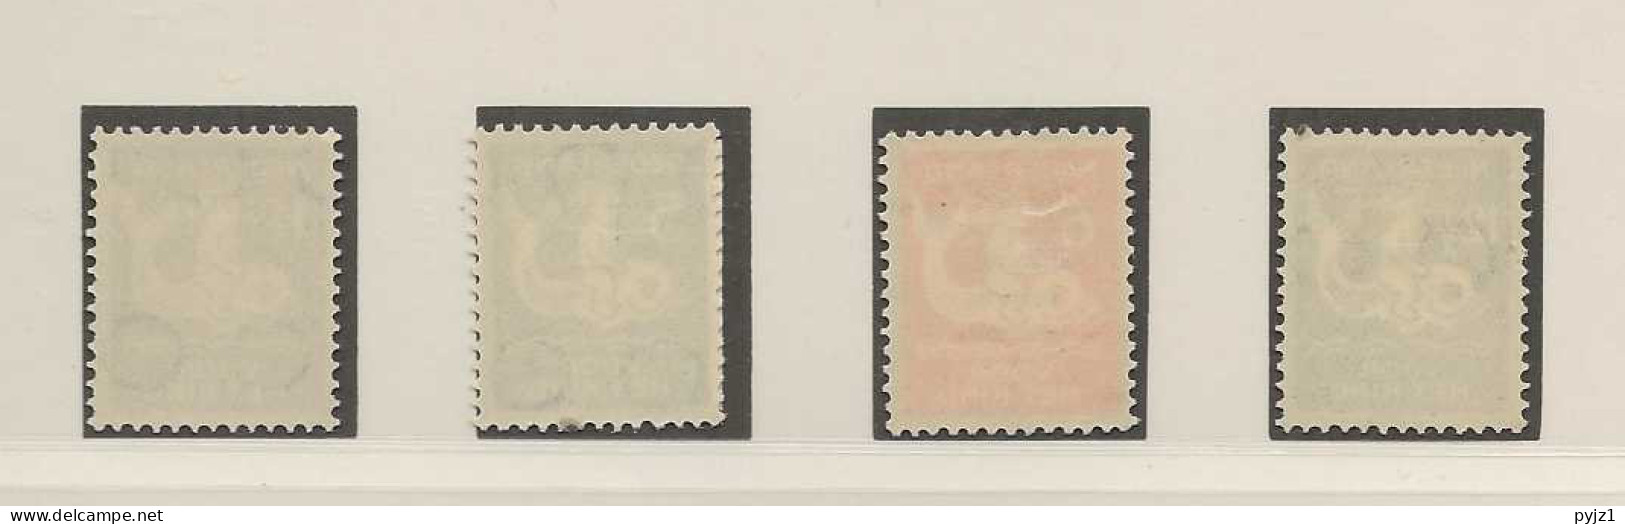 1929 MH/* Netherlands NVPH 225-28 - Unused Stamps